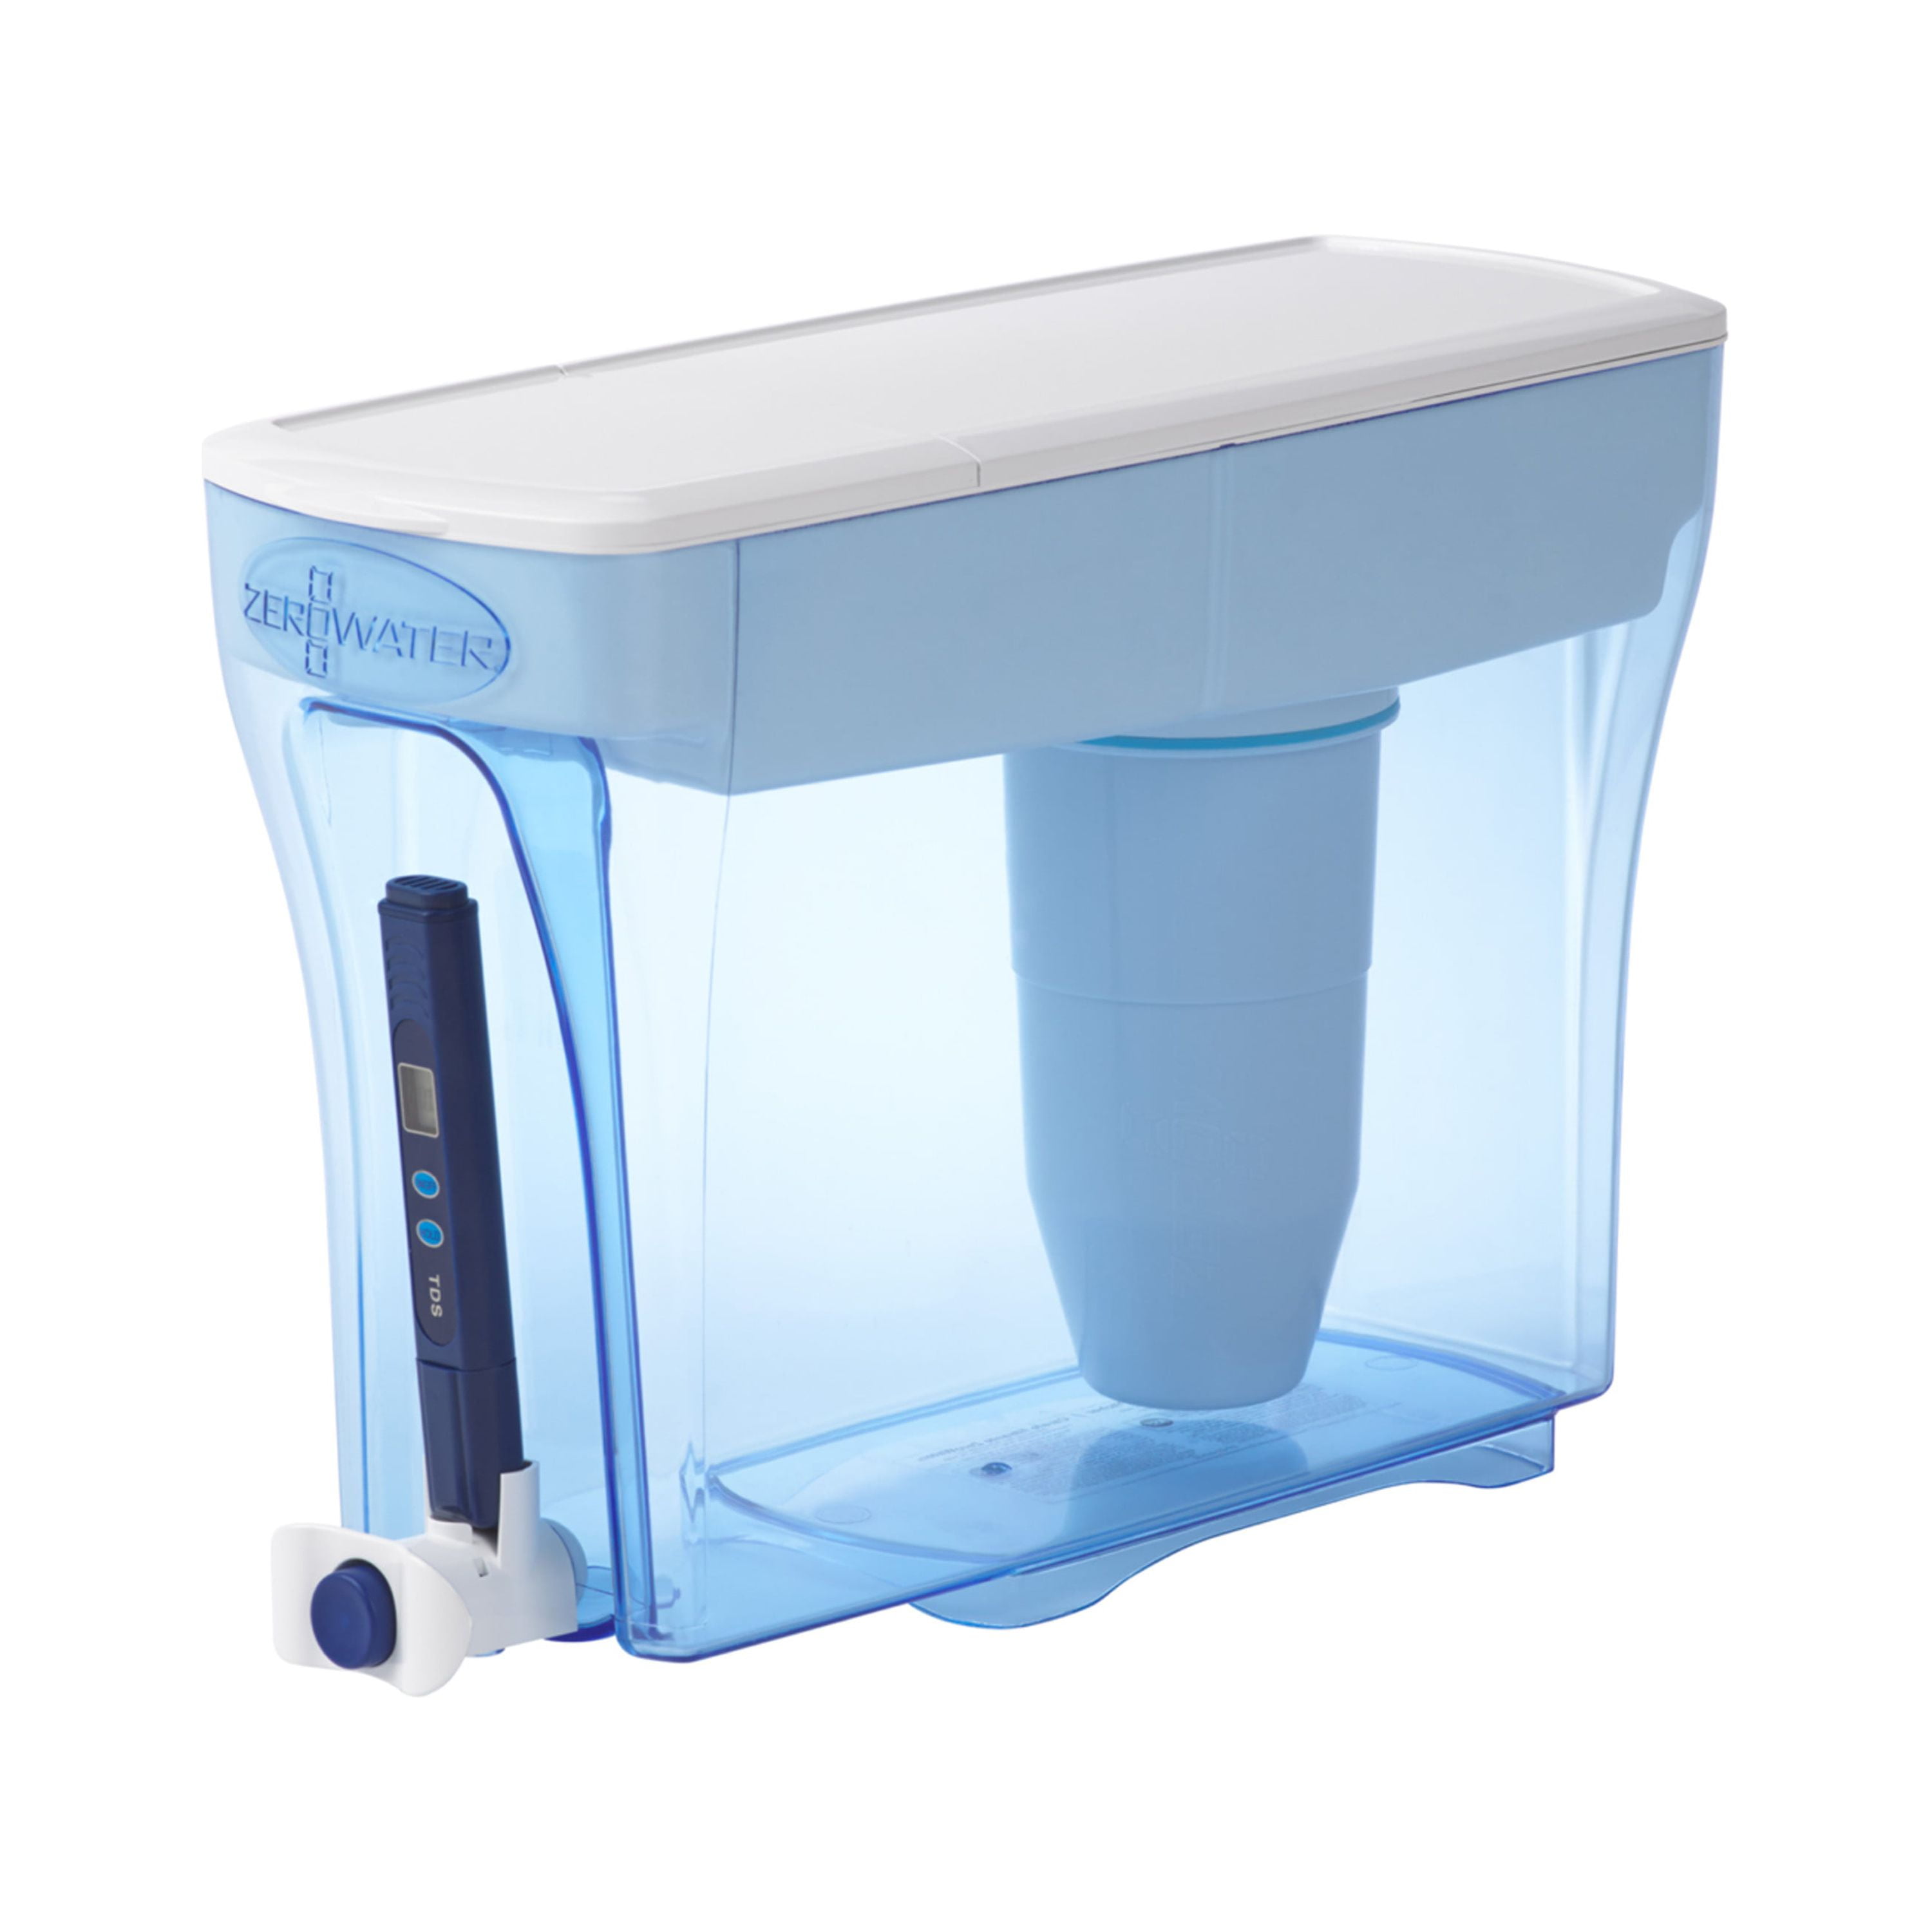 ZeroWater ZD-030RP Ready-Pour Water Dispenser, Blue/White, 30-Cup